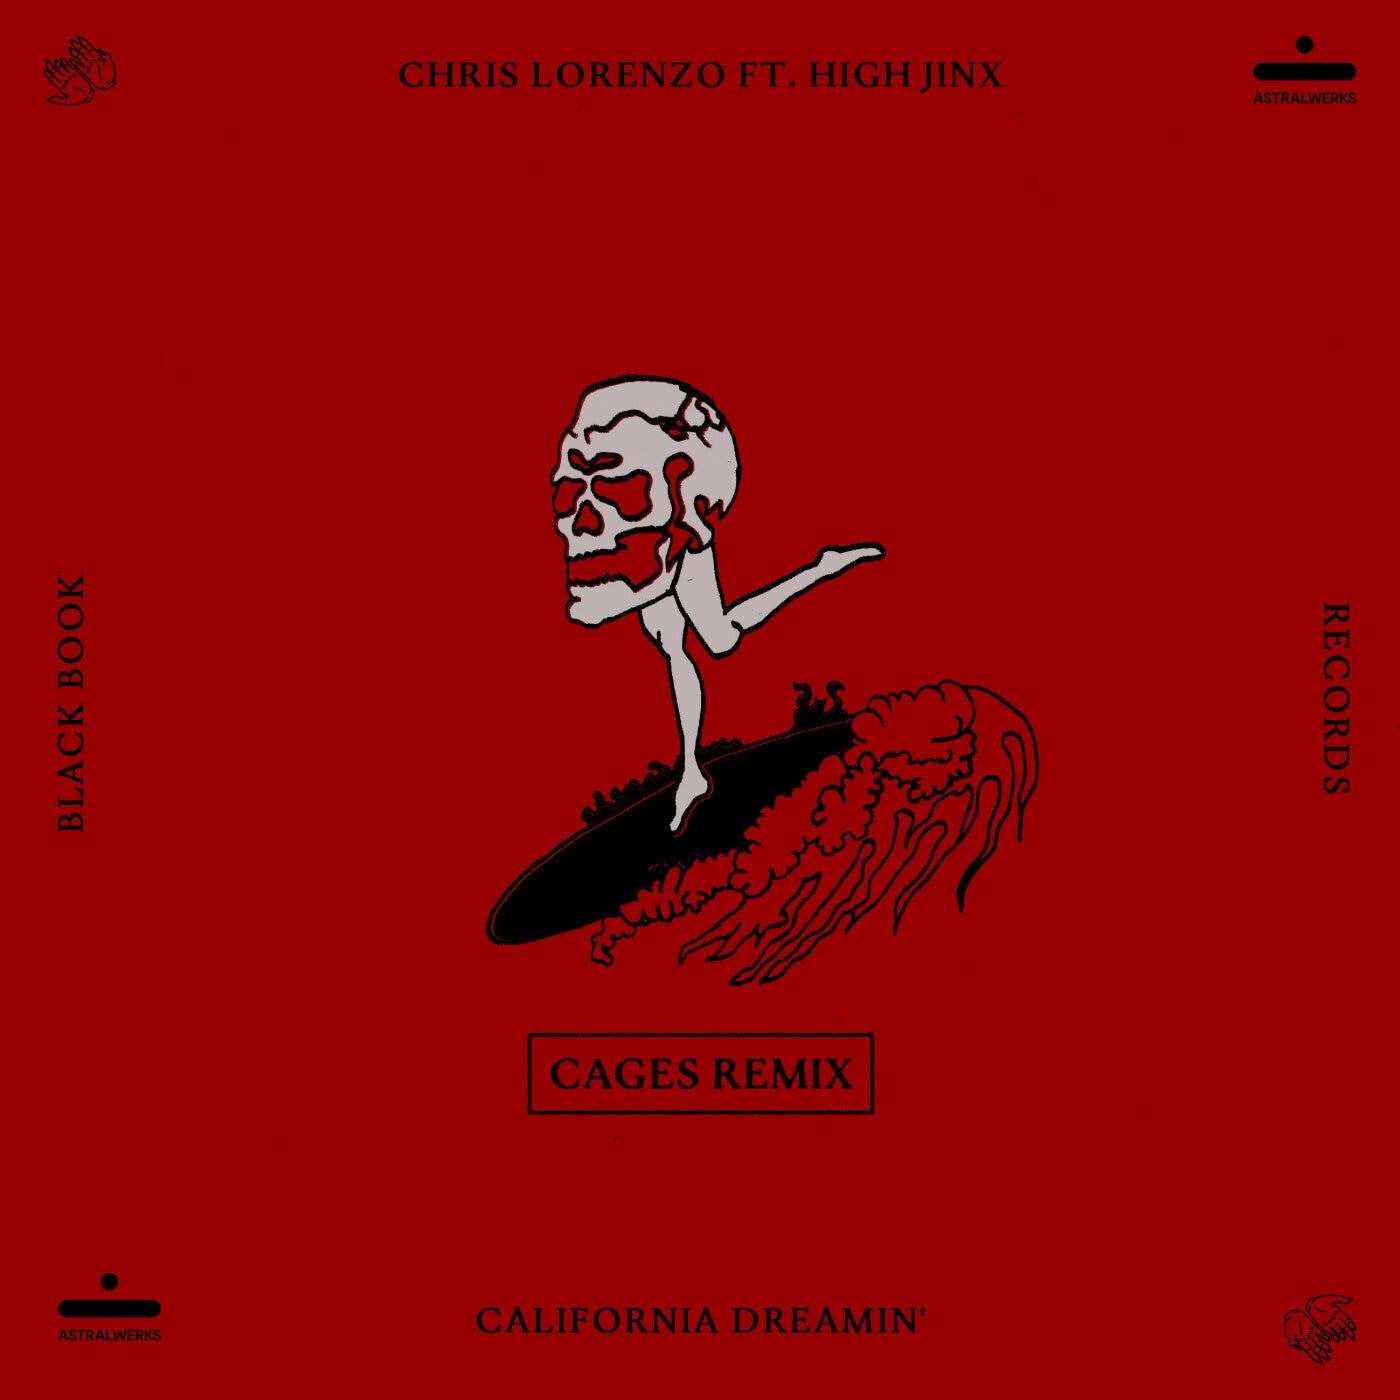 California Dreamin' - Cages Remix